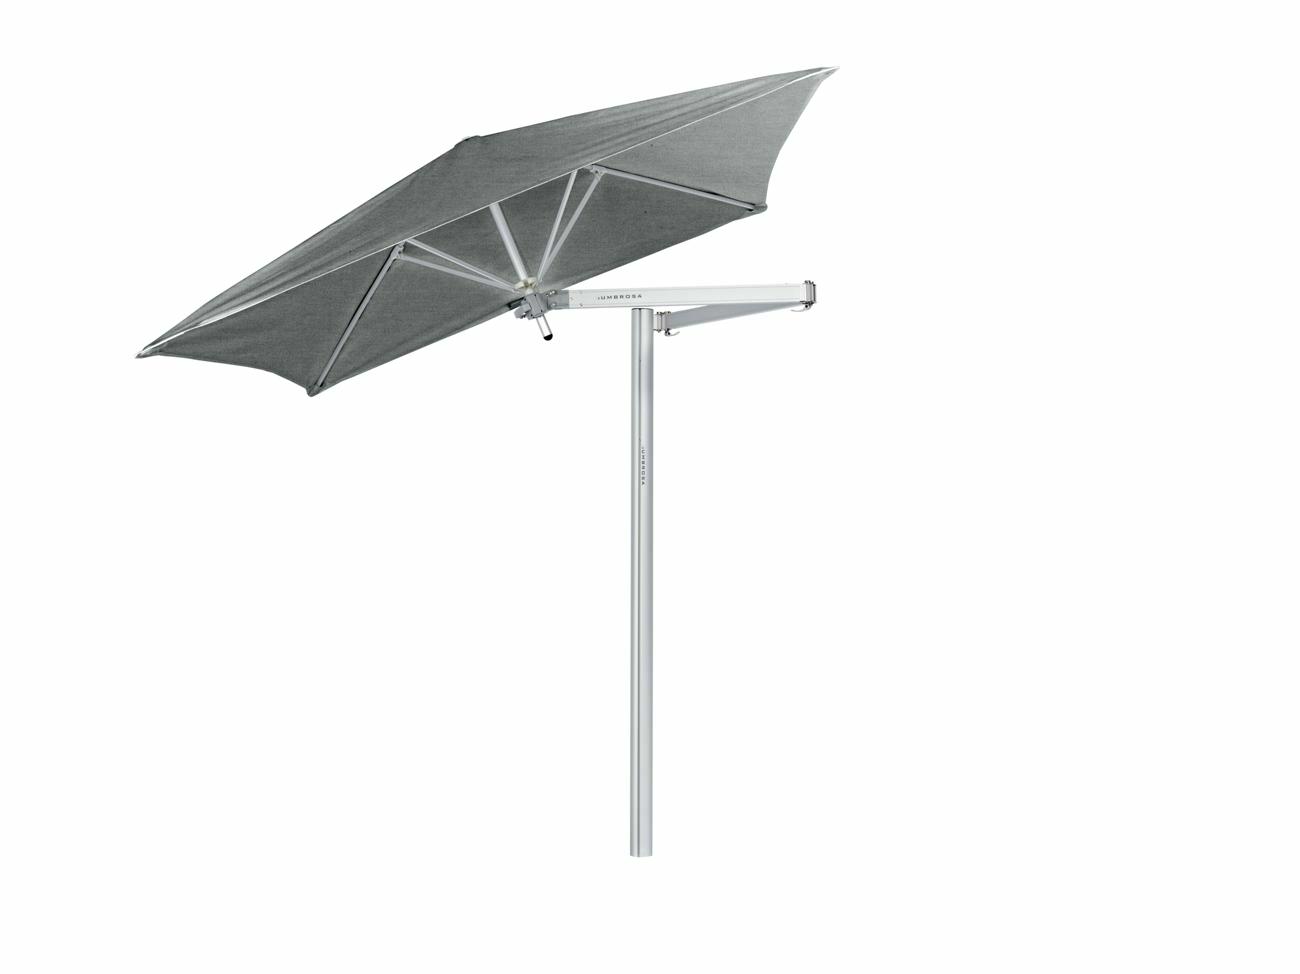 Paraflex cantilever umbrella square 1,9 m with Flanelle fabric and a Classic arm